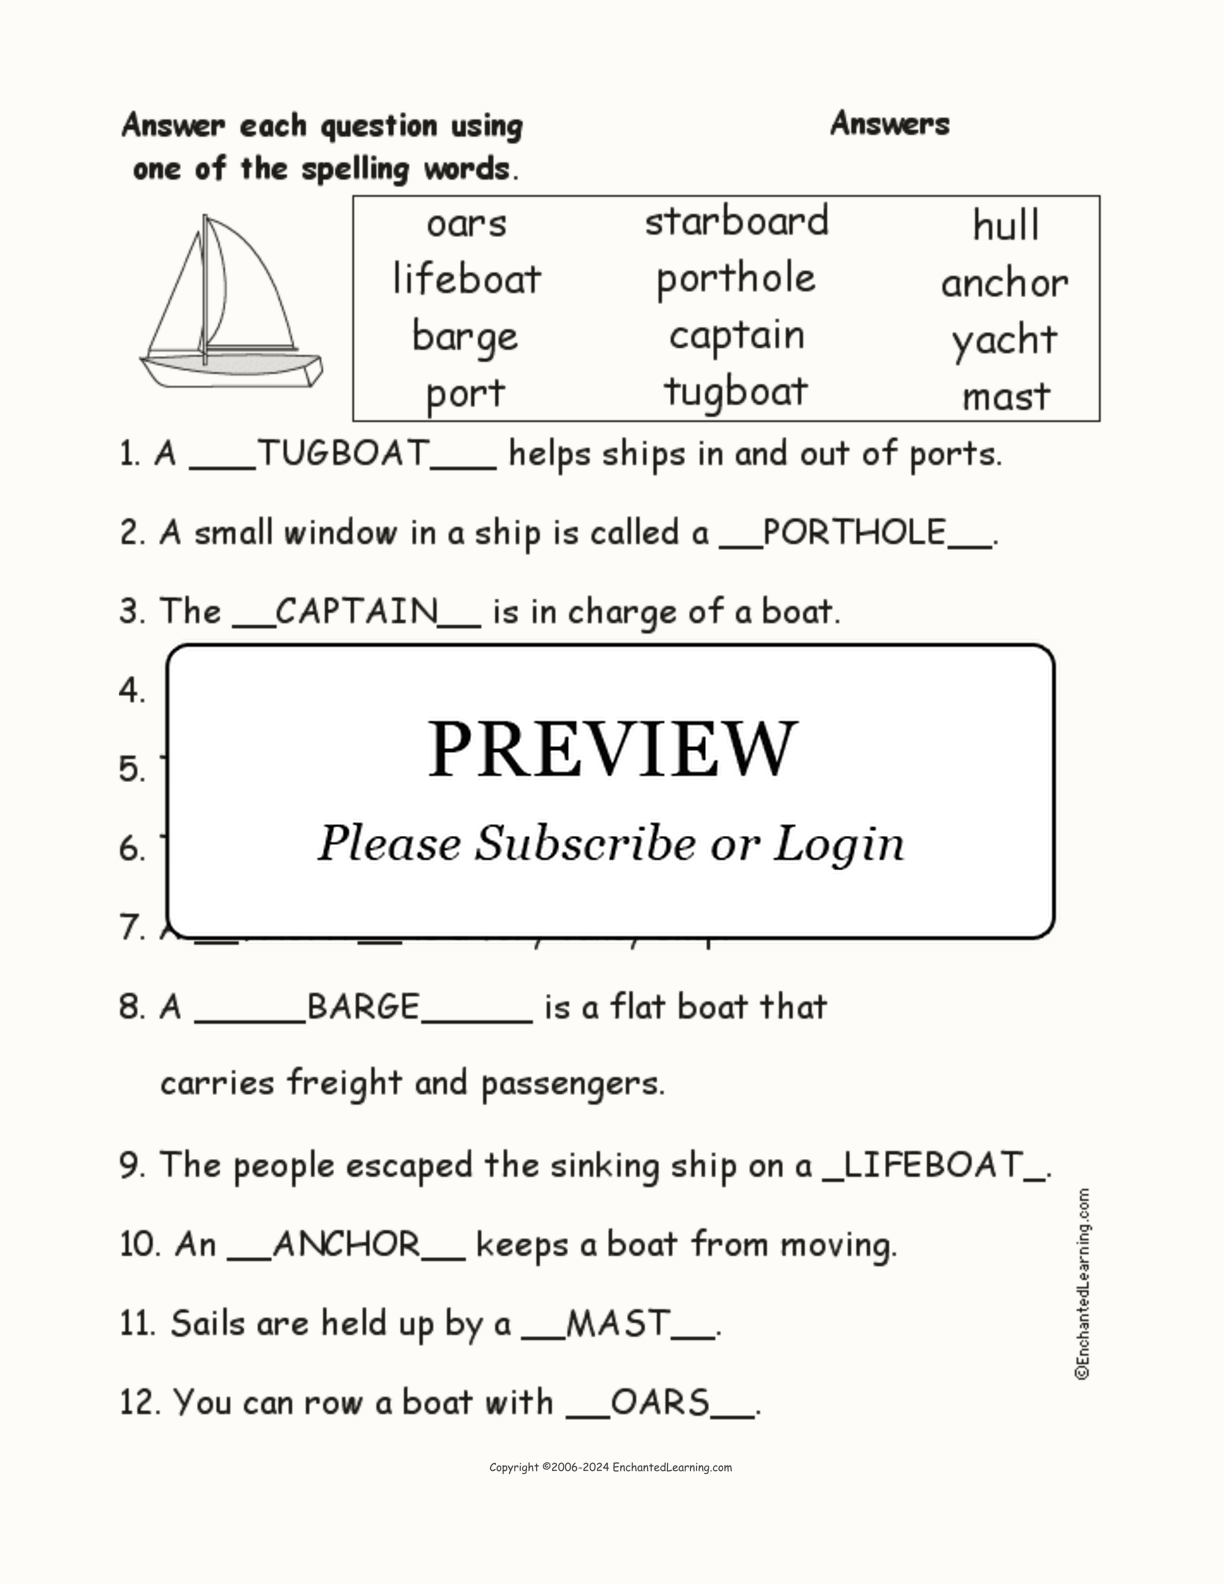 Boat Spelling Word Questions interactive worksheet page 2